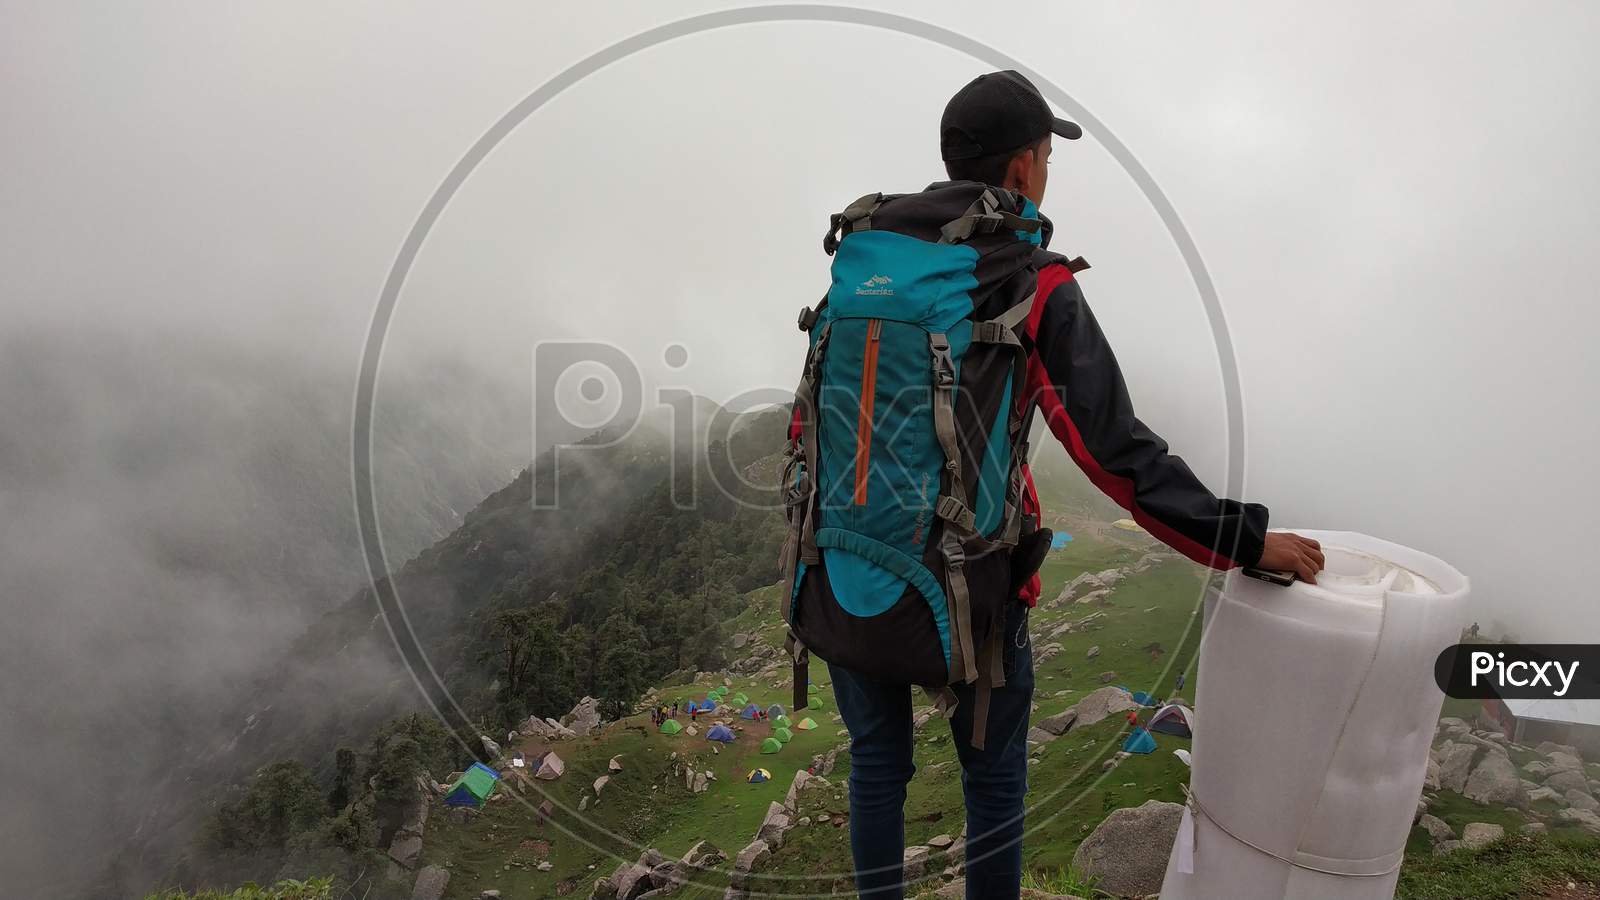 Hiker with backpack standing on top of a mountain and enjoying the view in India Mountains Himalayas Dharamshala Triund Himachal Pradesh